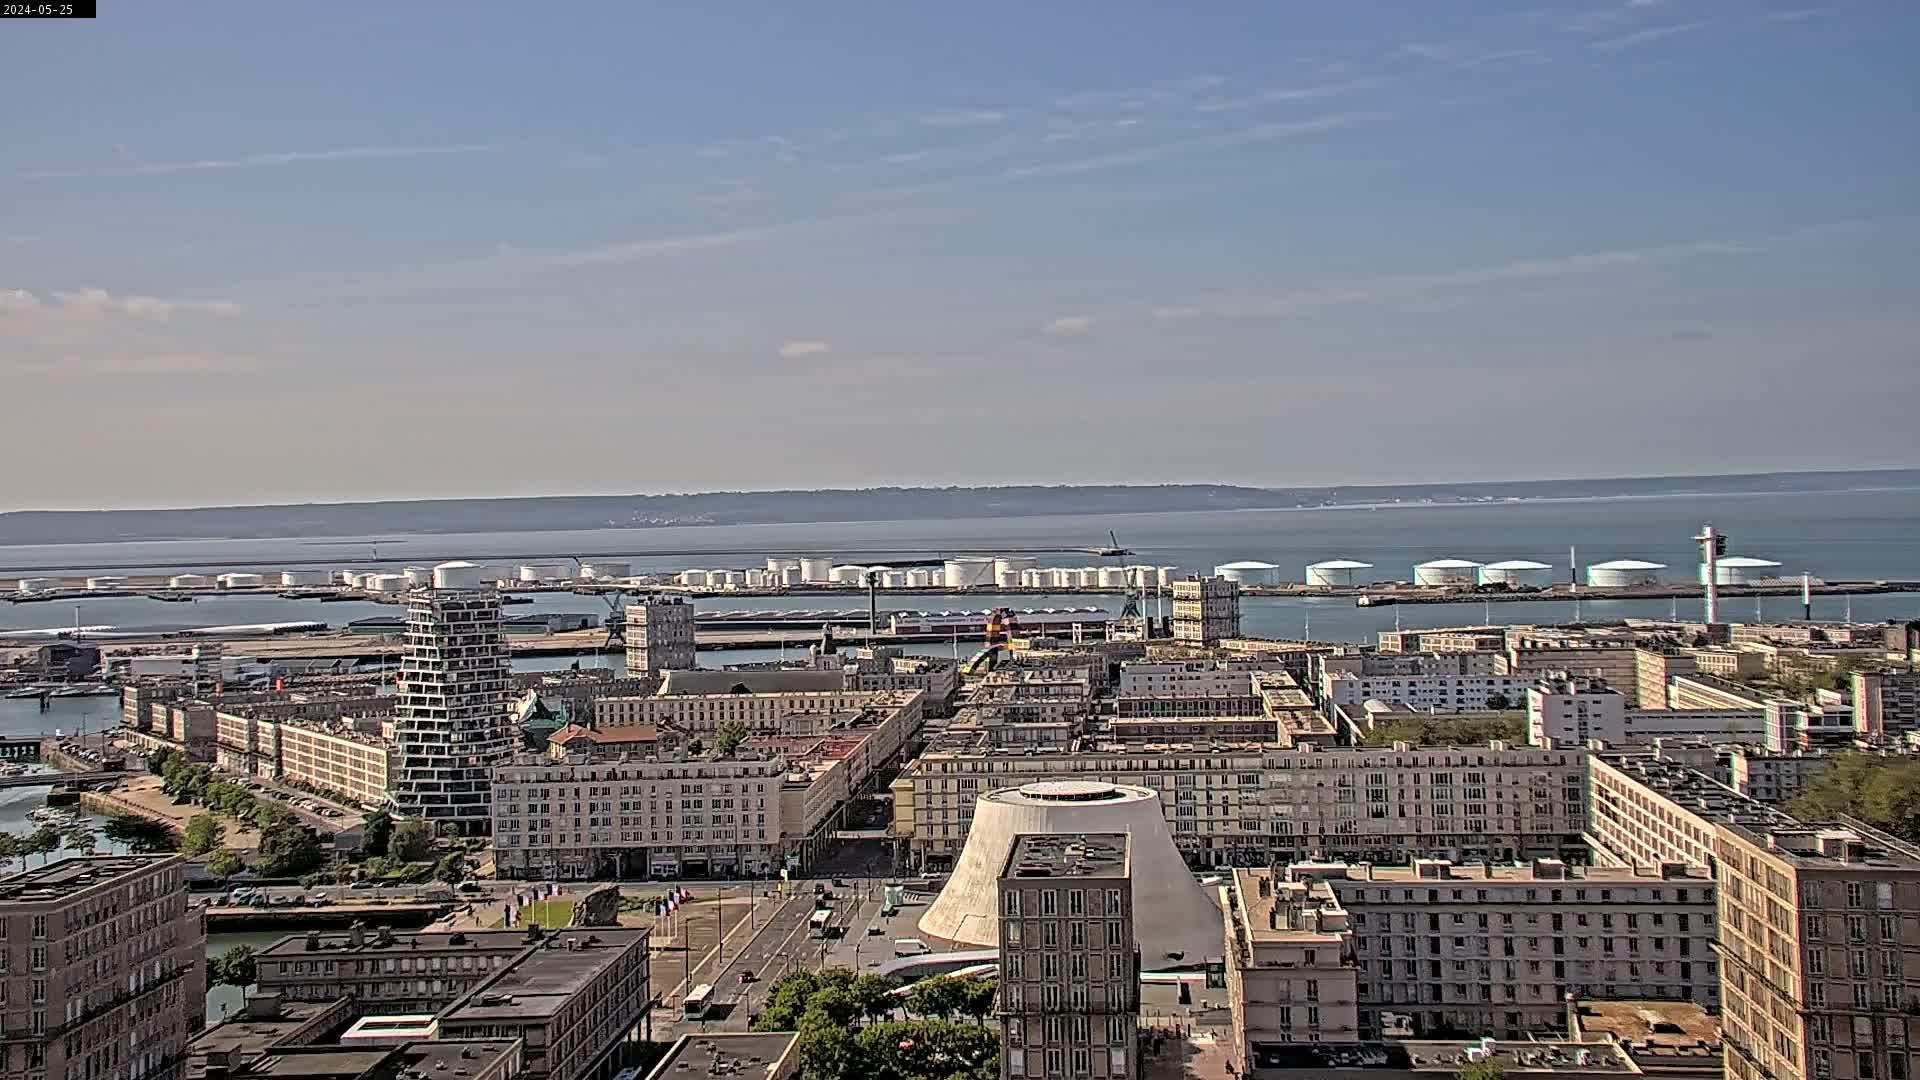 Le Havre Gio. 10:10